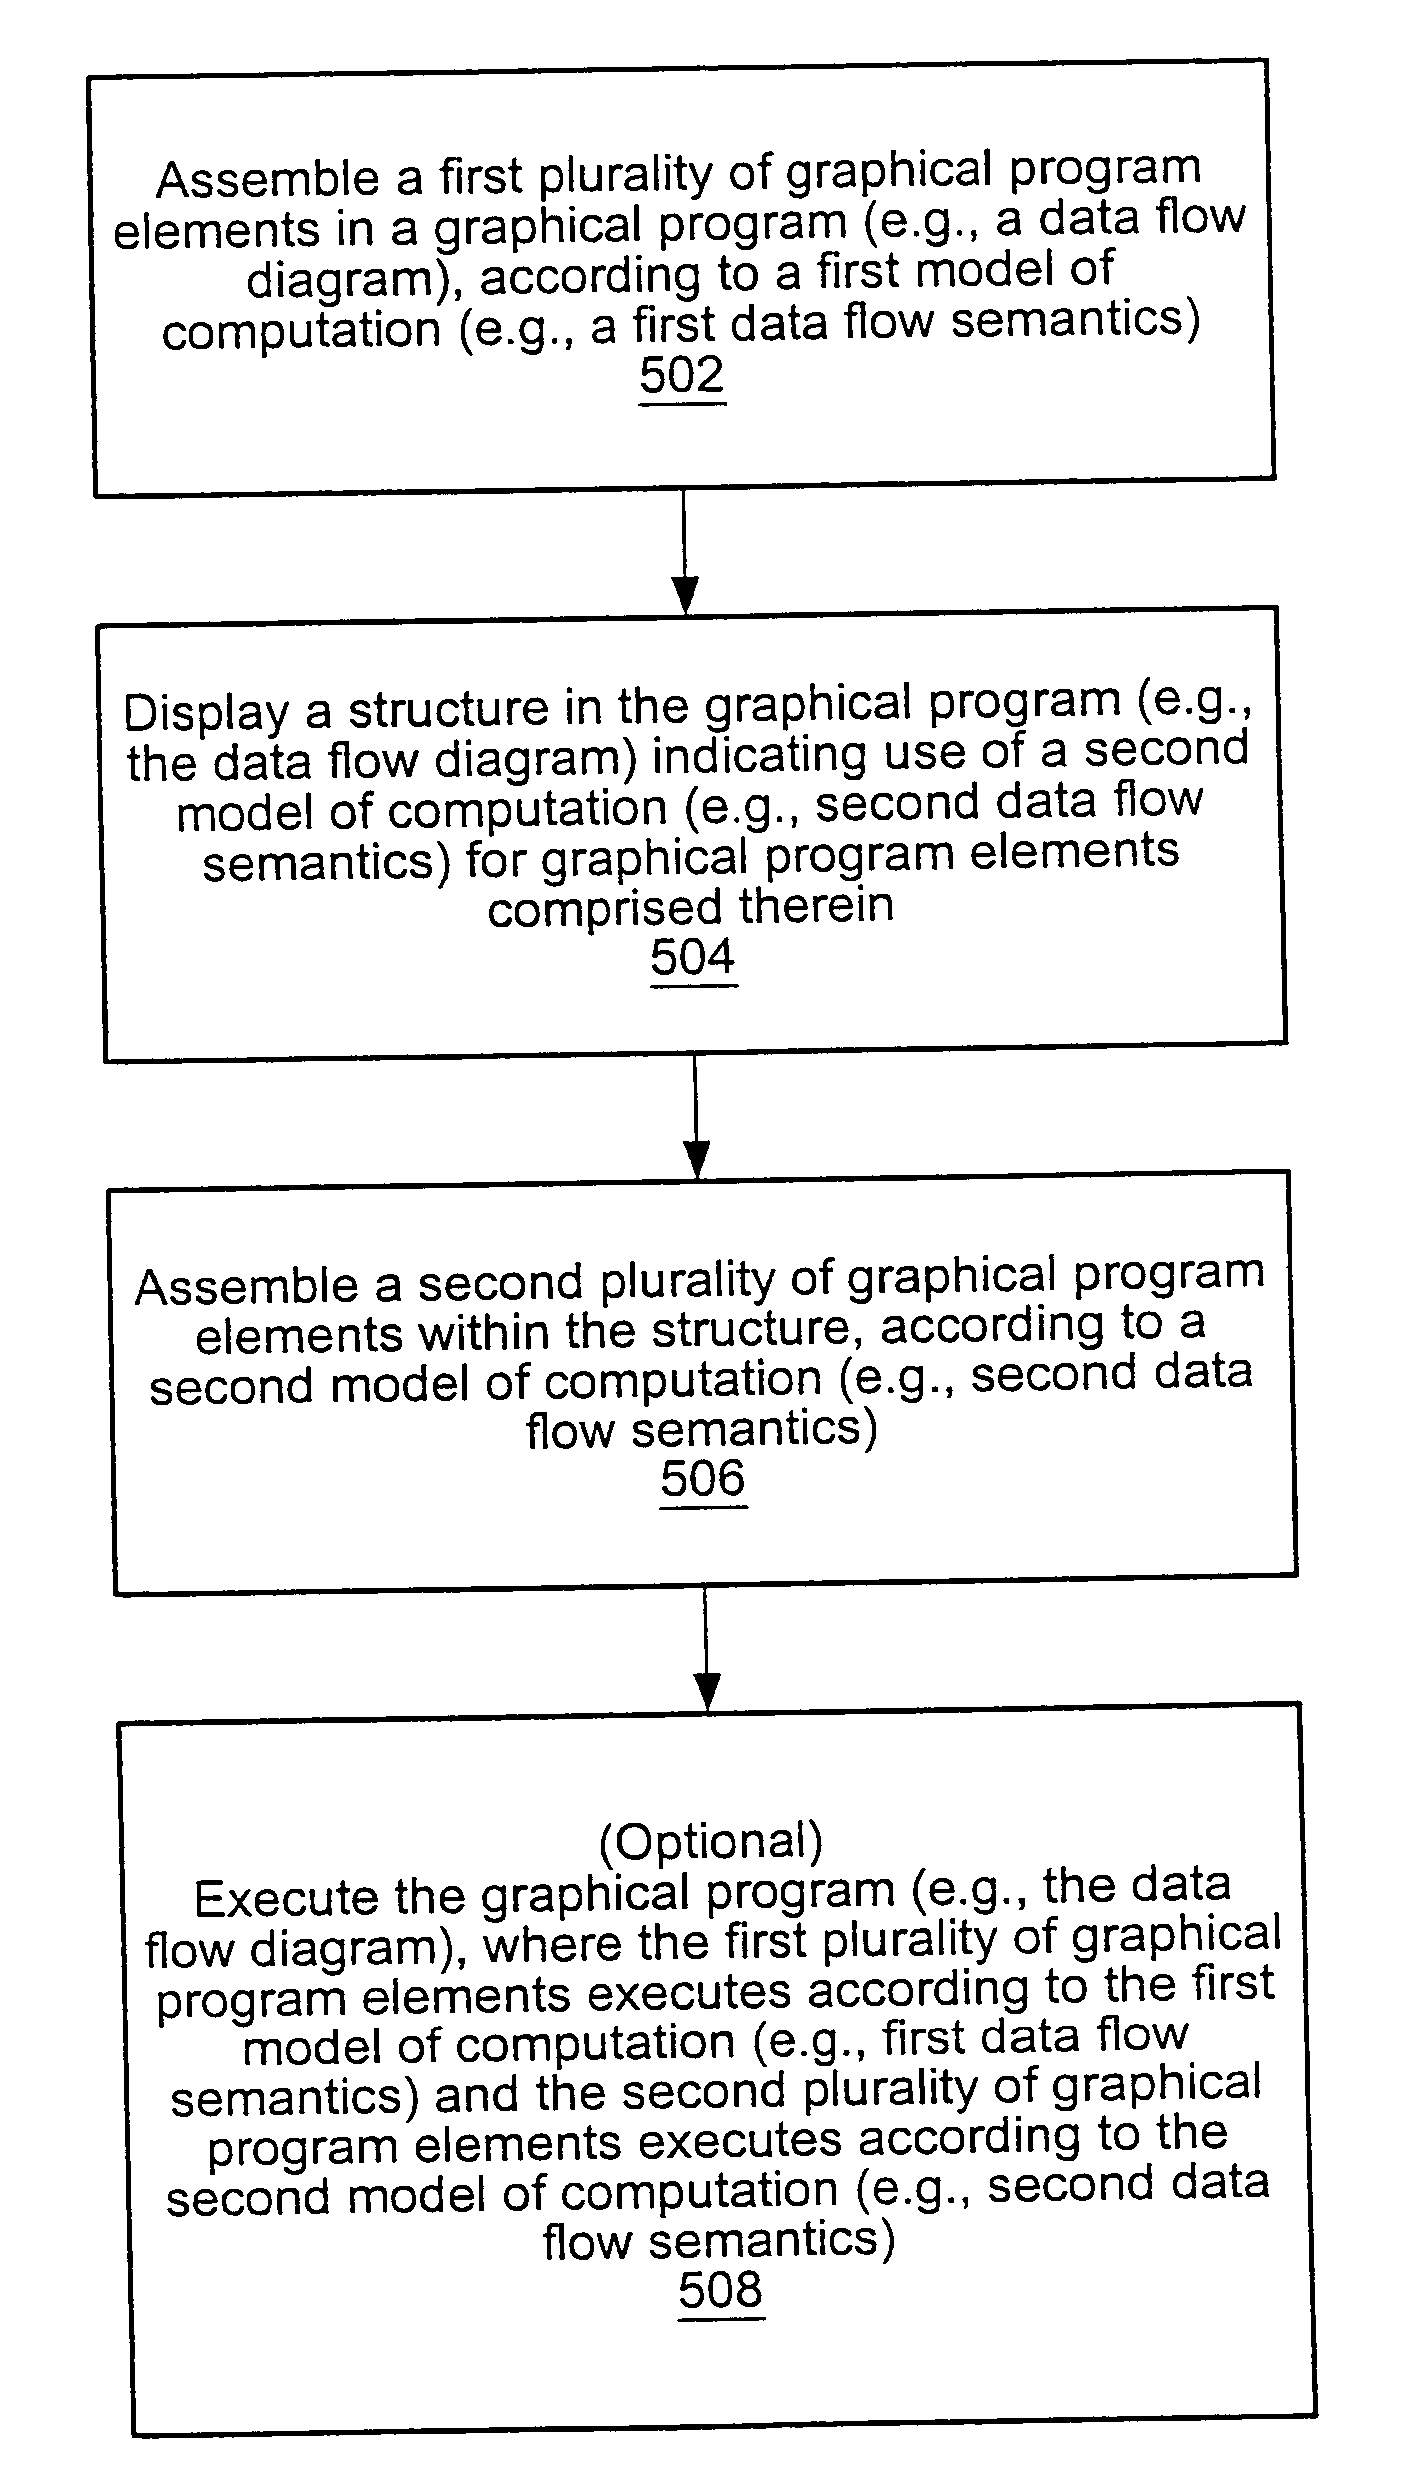 Creating and executing a graphical program with first model of computation that includes a structure supporting second model of computation